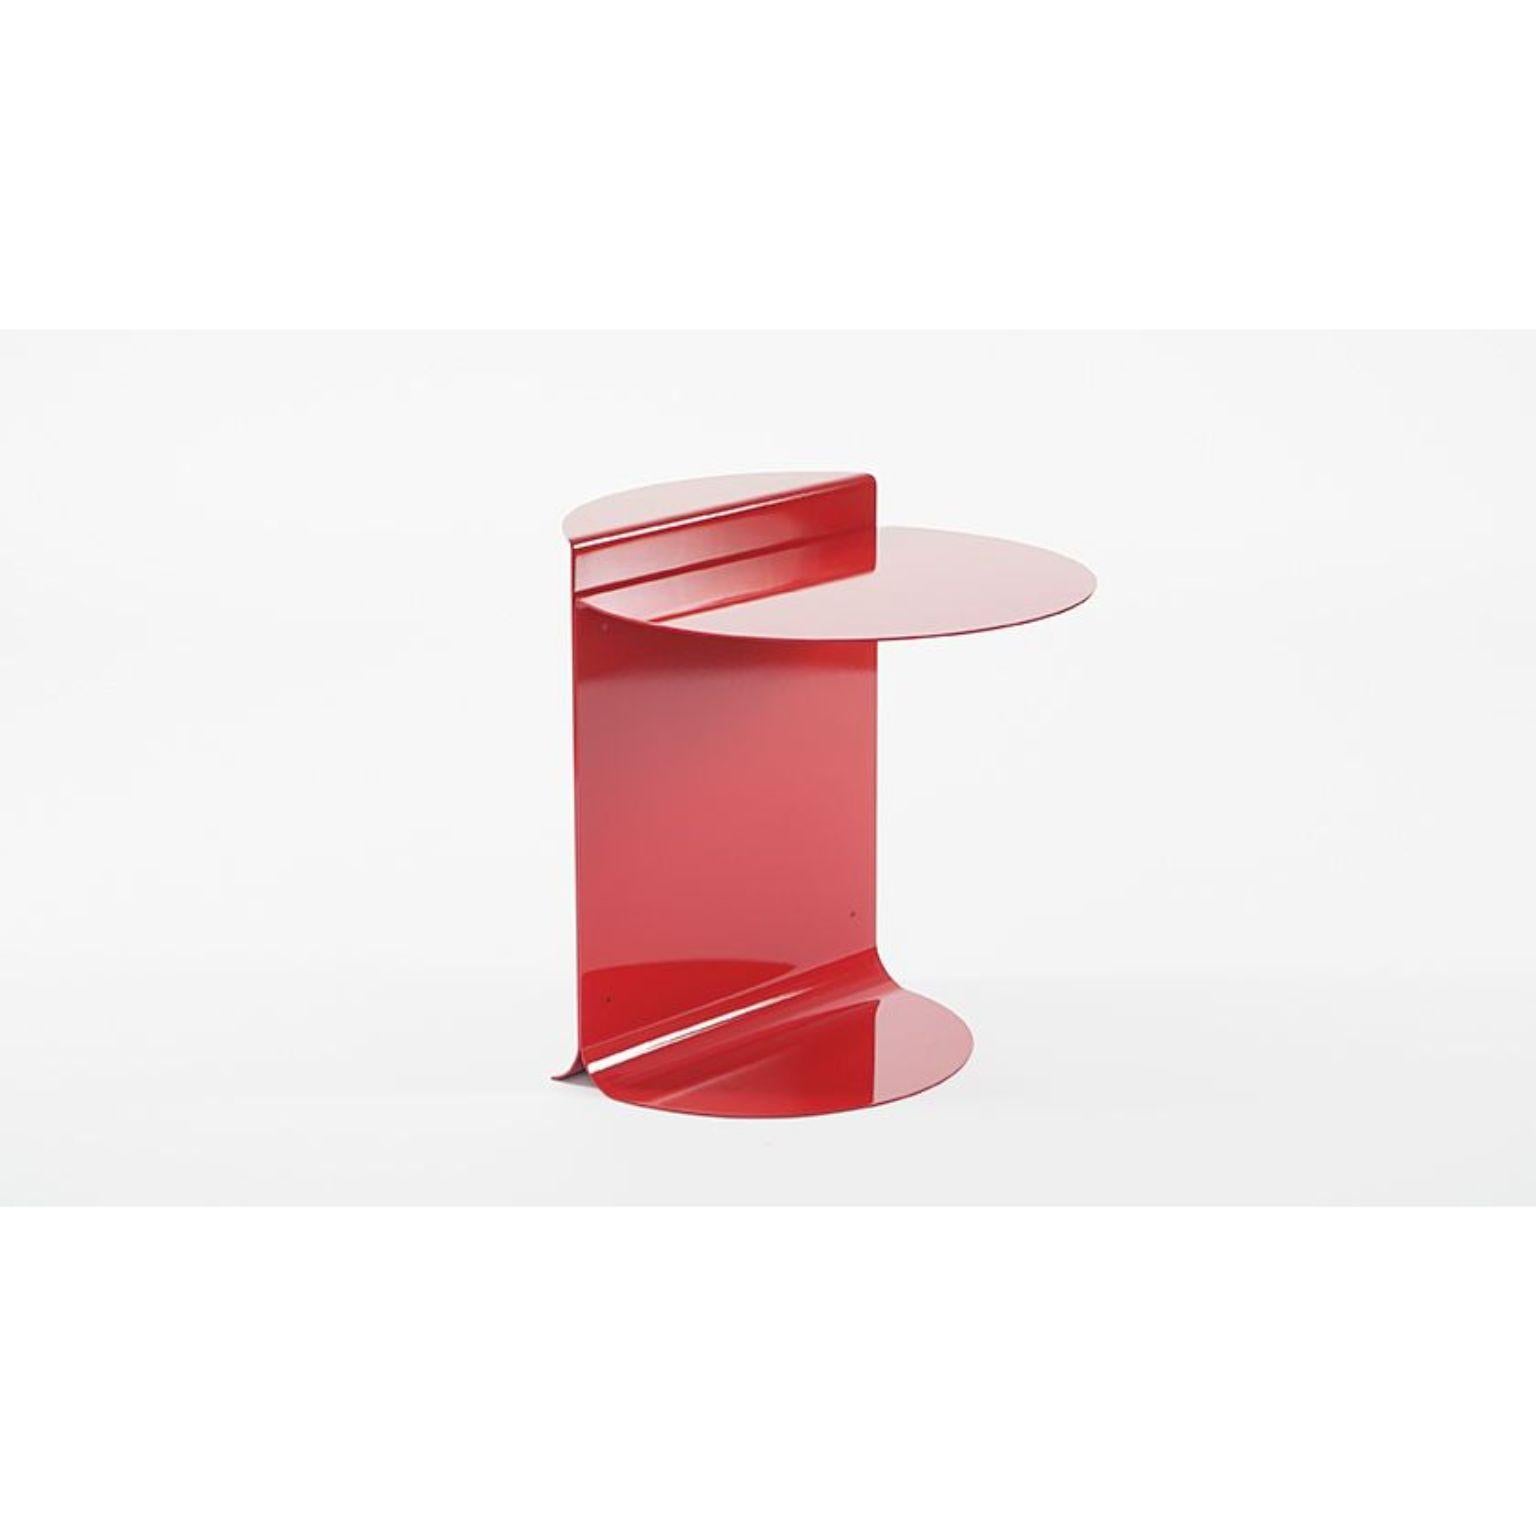 Red O tabe by Estudio Persona
Dimensions: W 50.8 x D 50.8 x H 53.4 cm
Materials: Powder coated steel

Side table in blackened stainless steel or powder coated steel.
Outdoor version available in stainless steel with polyurethane